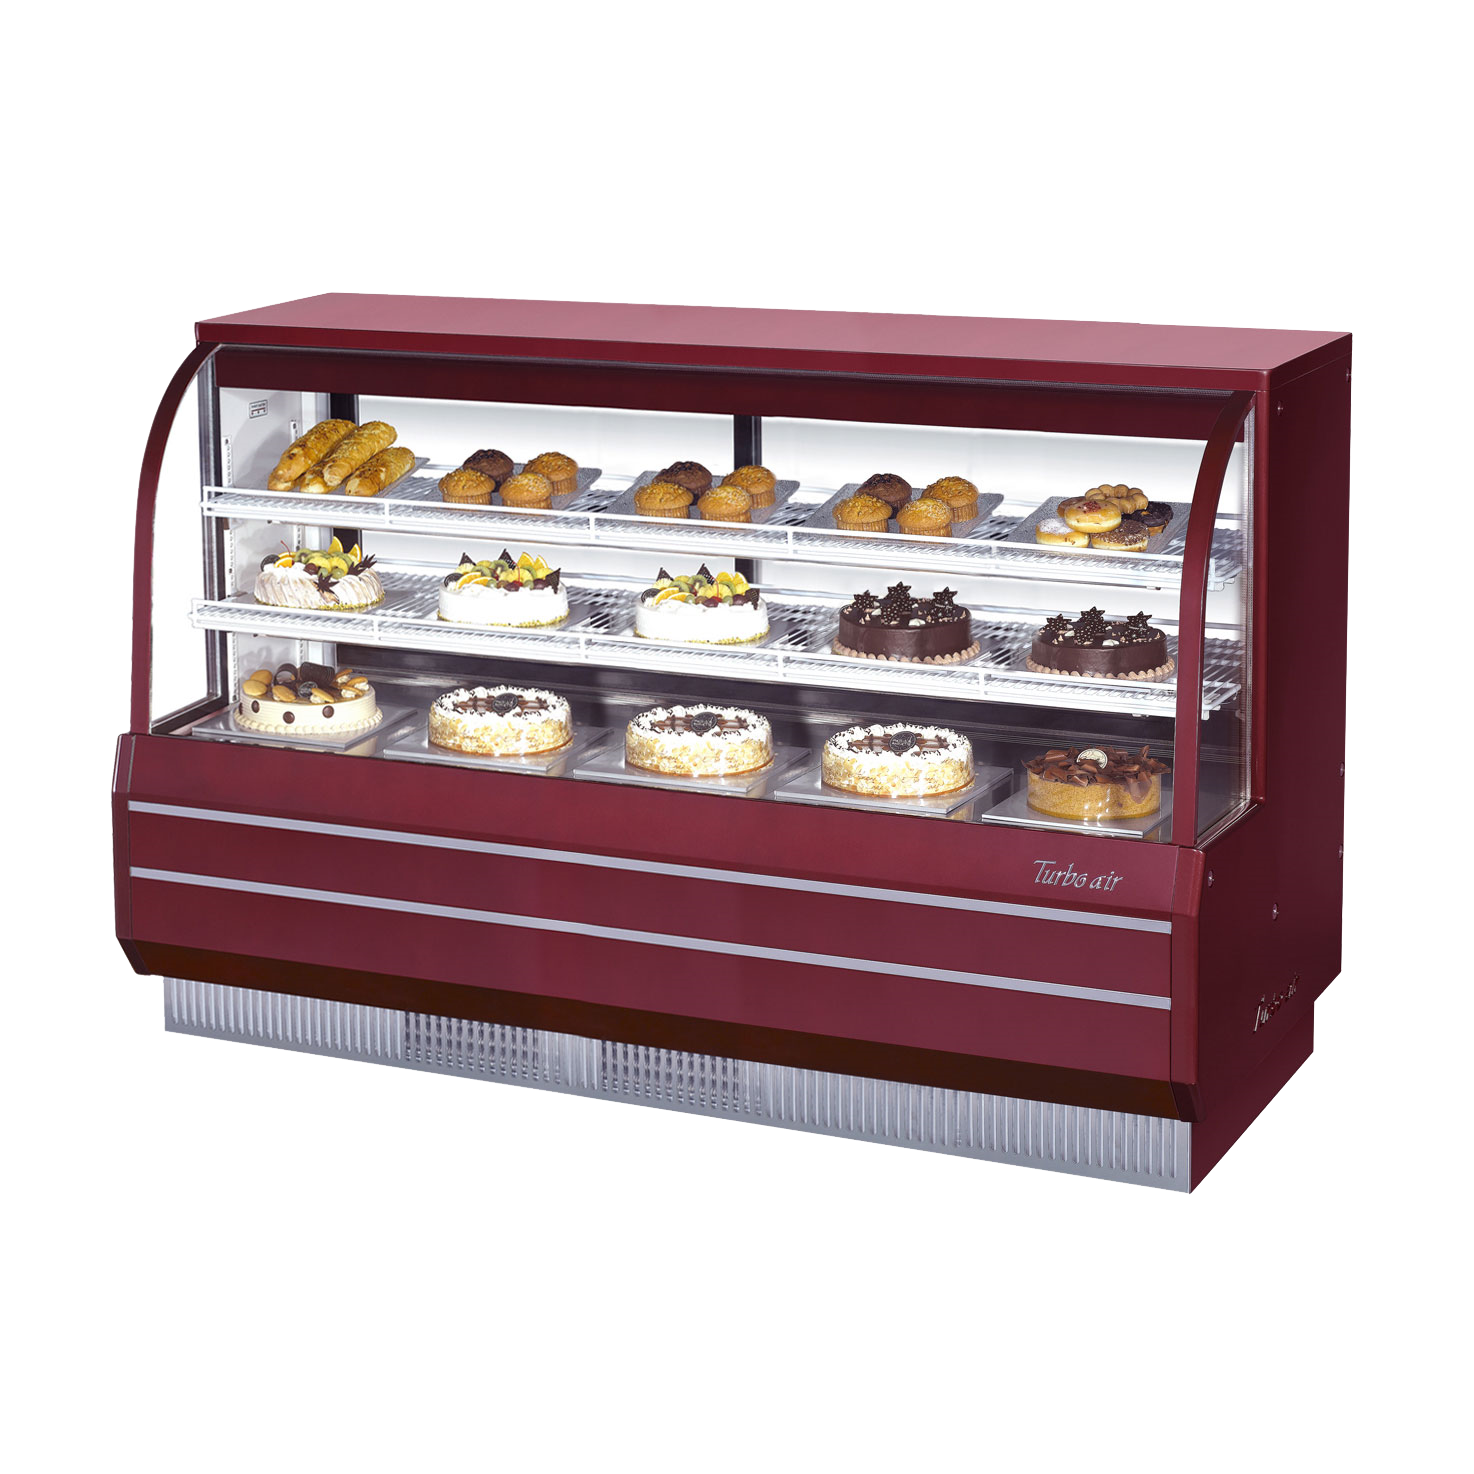 superior-equipment-supply - Turbo Air - Turbo Air 72.5" Wide Stainless Steel Refrigerated Bakery Case